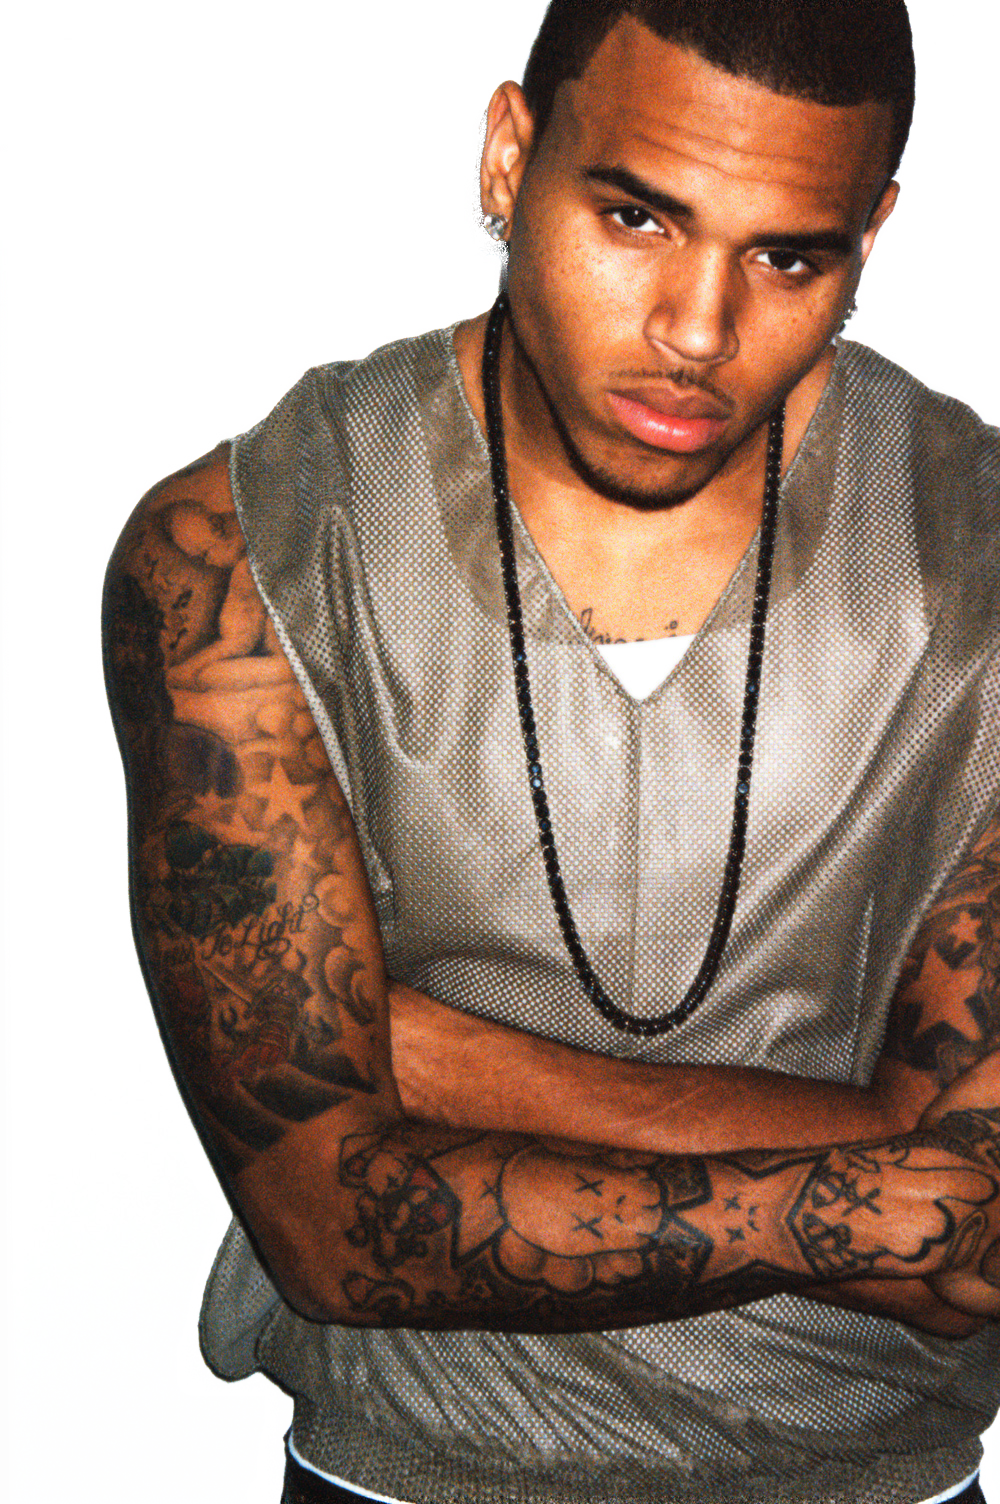 Brown Sleeve Picture T-Shirt Tattoo Chris Clipart